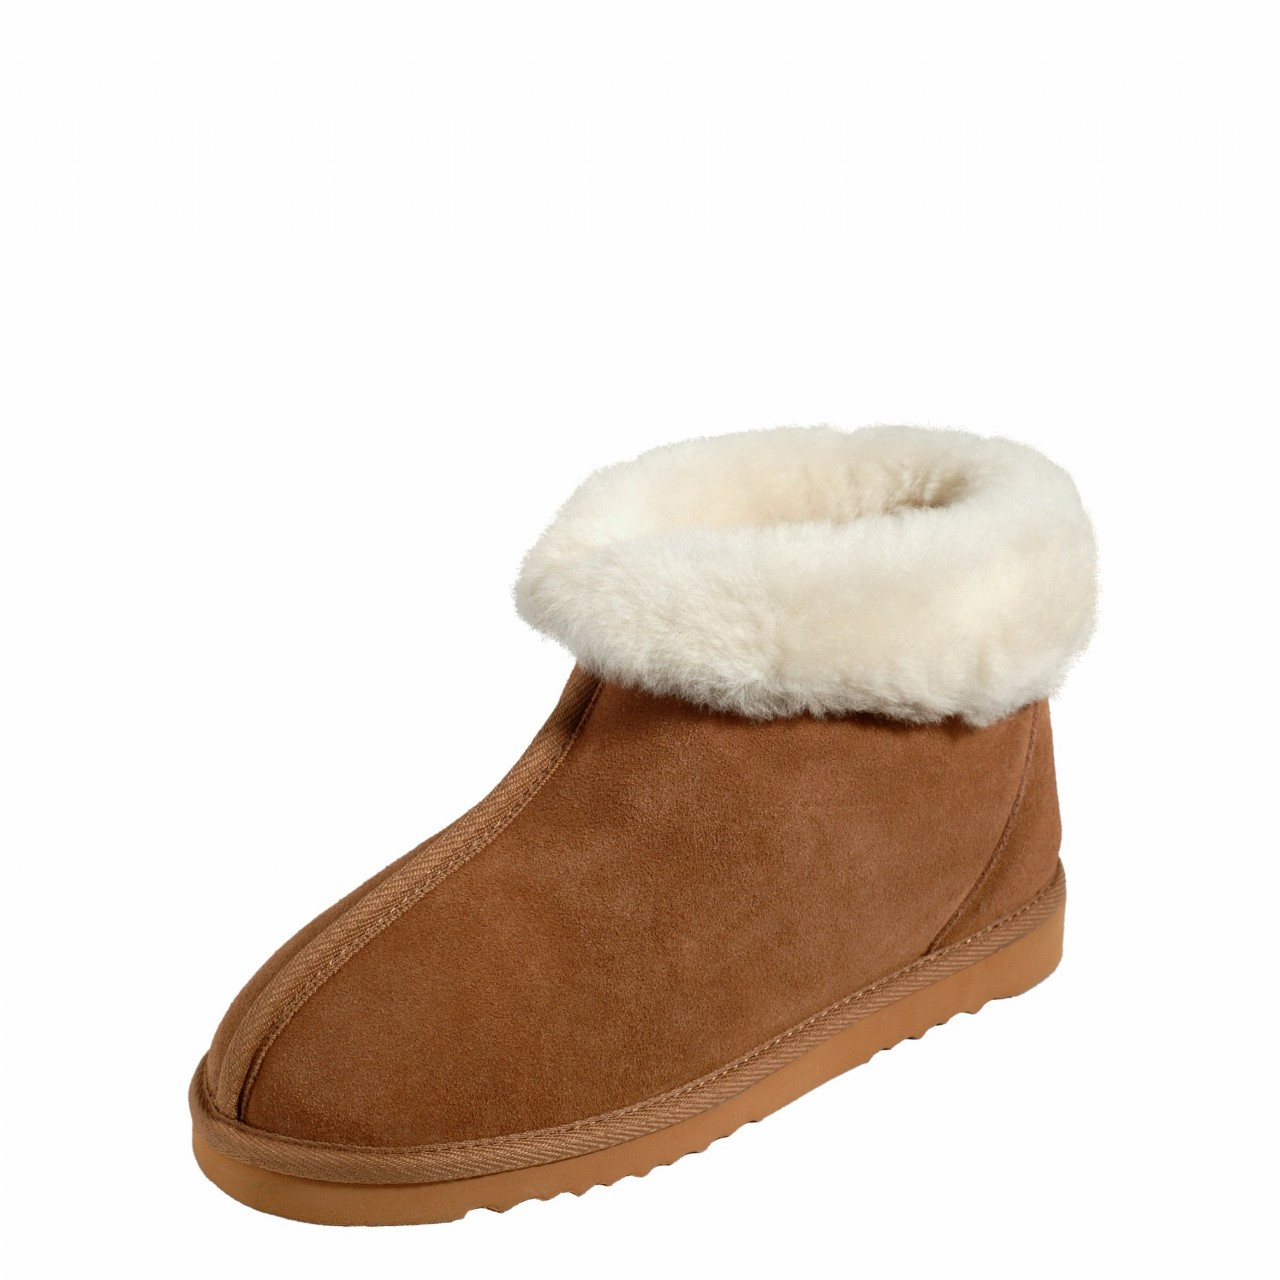 ugg boots and slippers